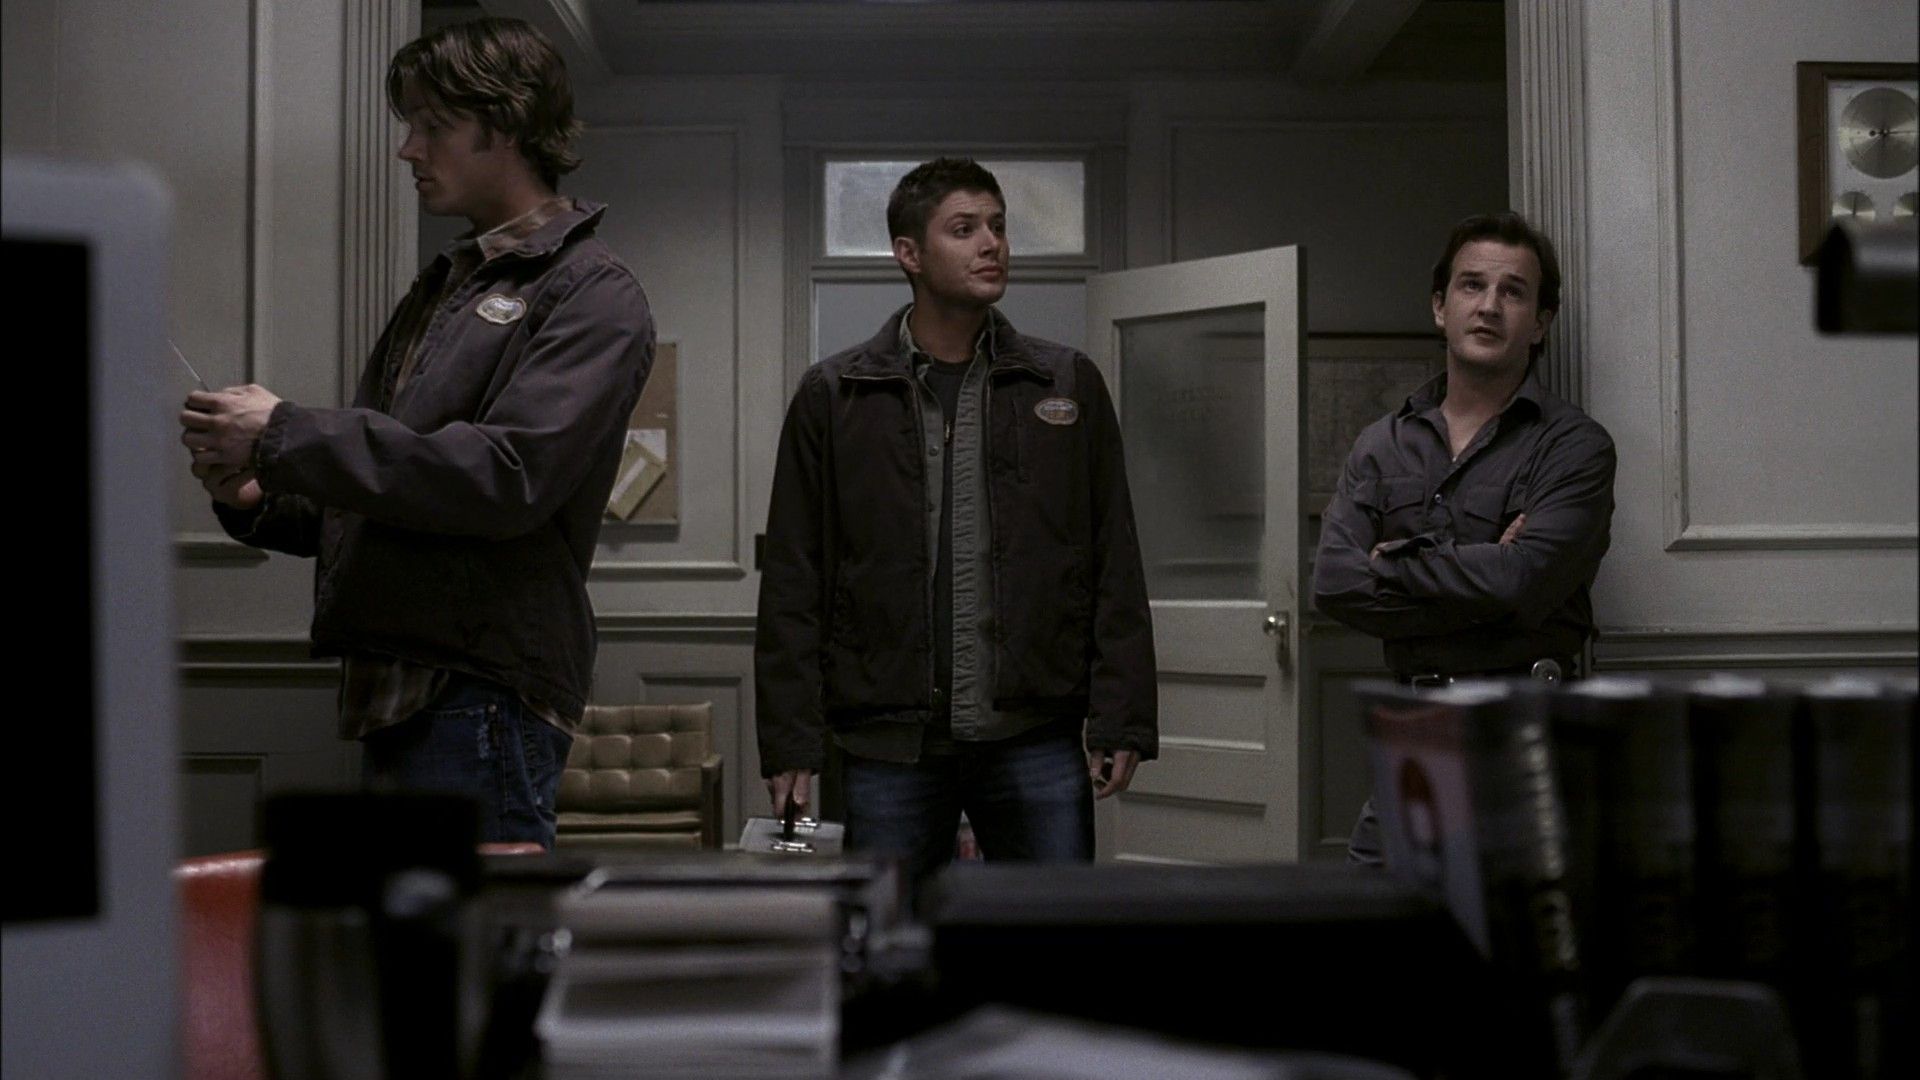 https://thewinchesterfamilybusiness.com/wp-content/CaptionThis/2021/SPN_02x15.jpg